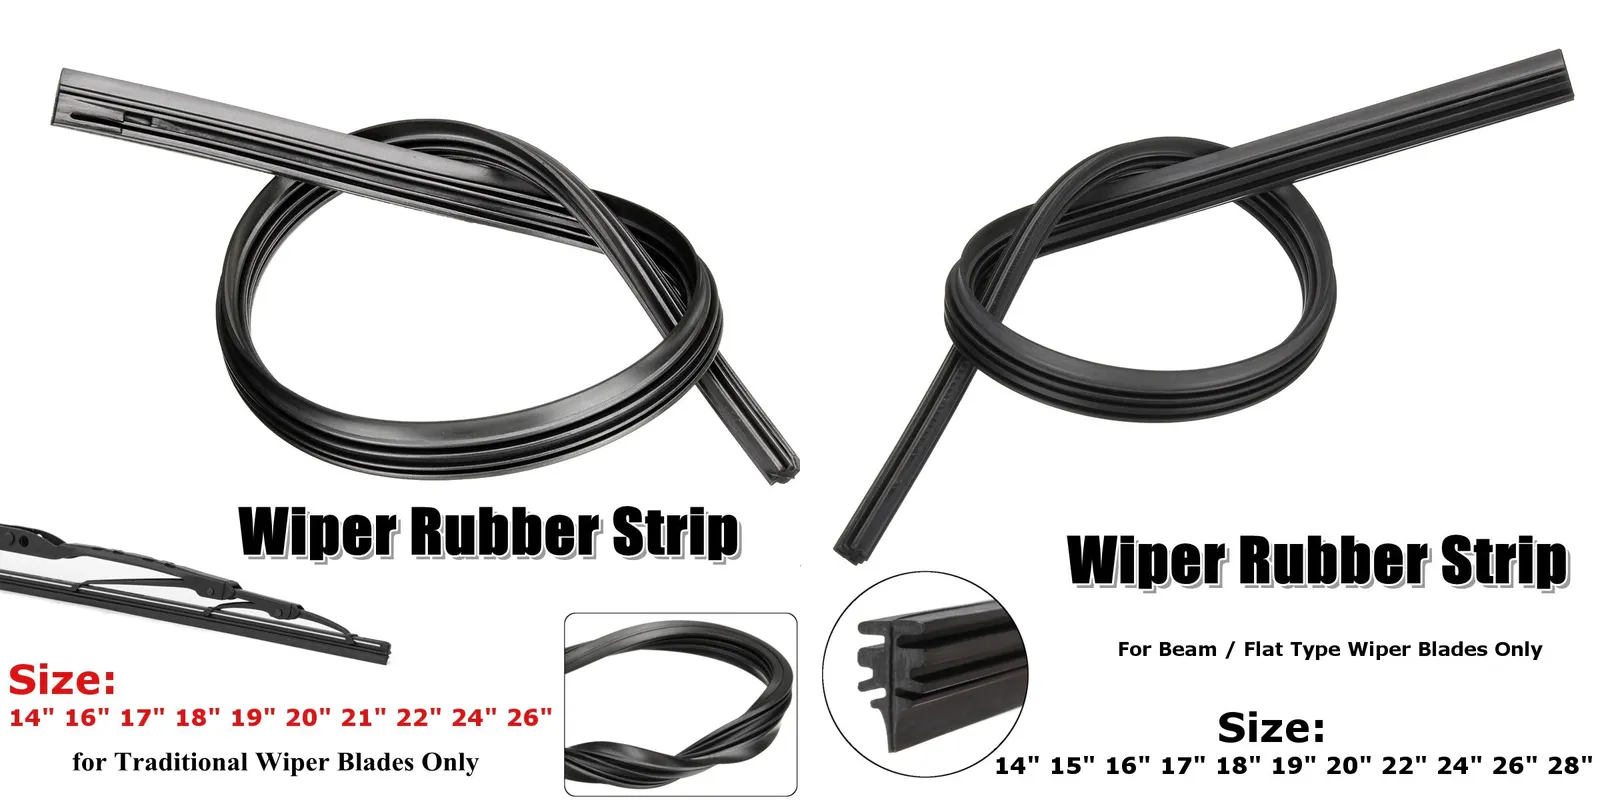 Things You Should Know about wiper blade Rubber Strip